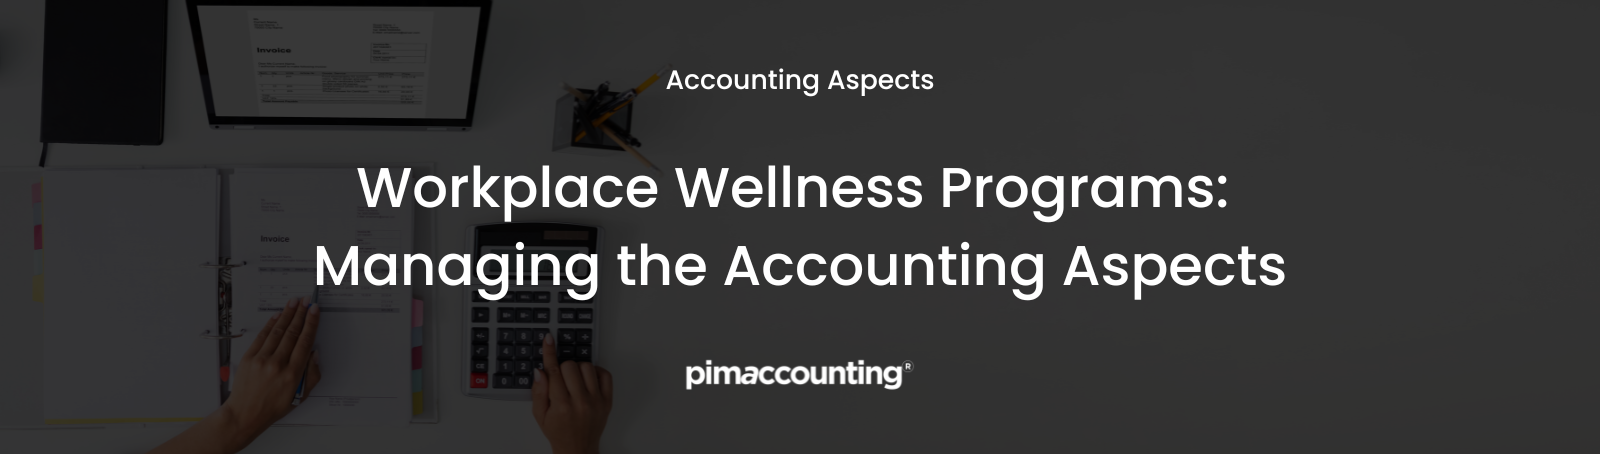 Workplace Wellness: Accounting Aspects Management